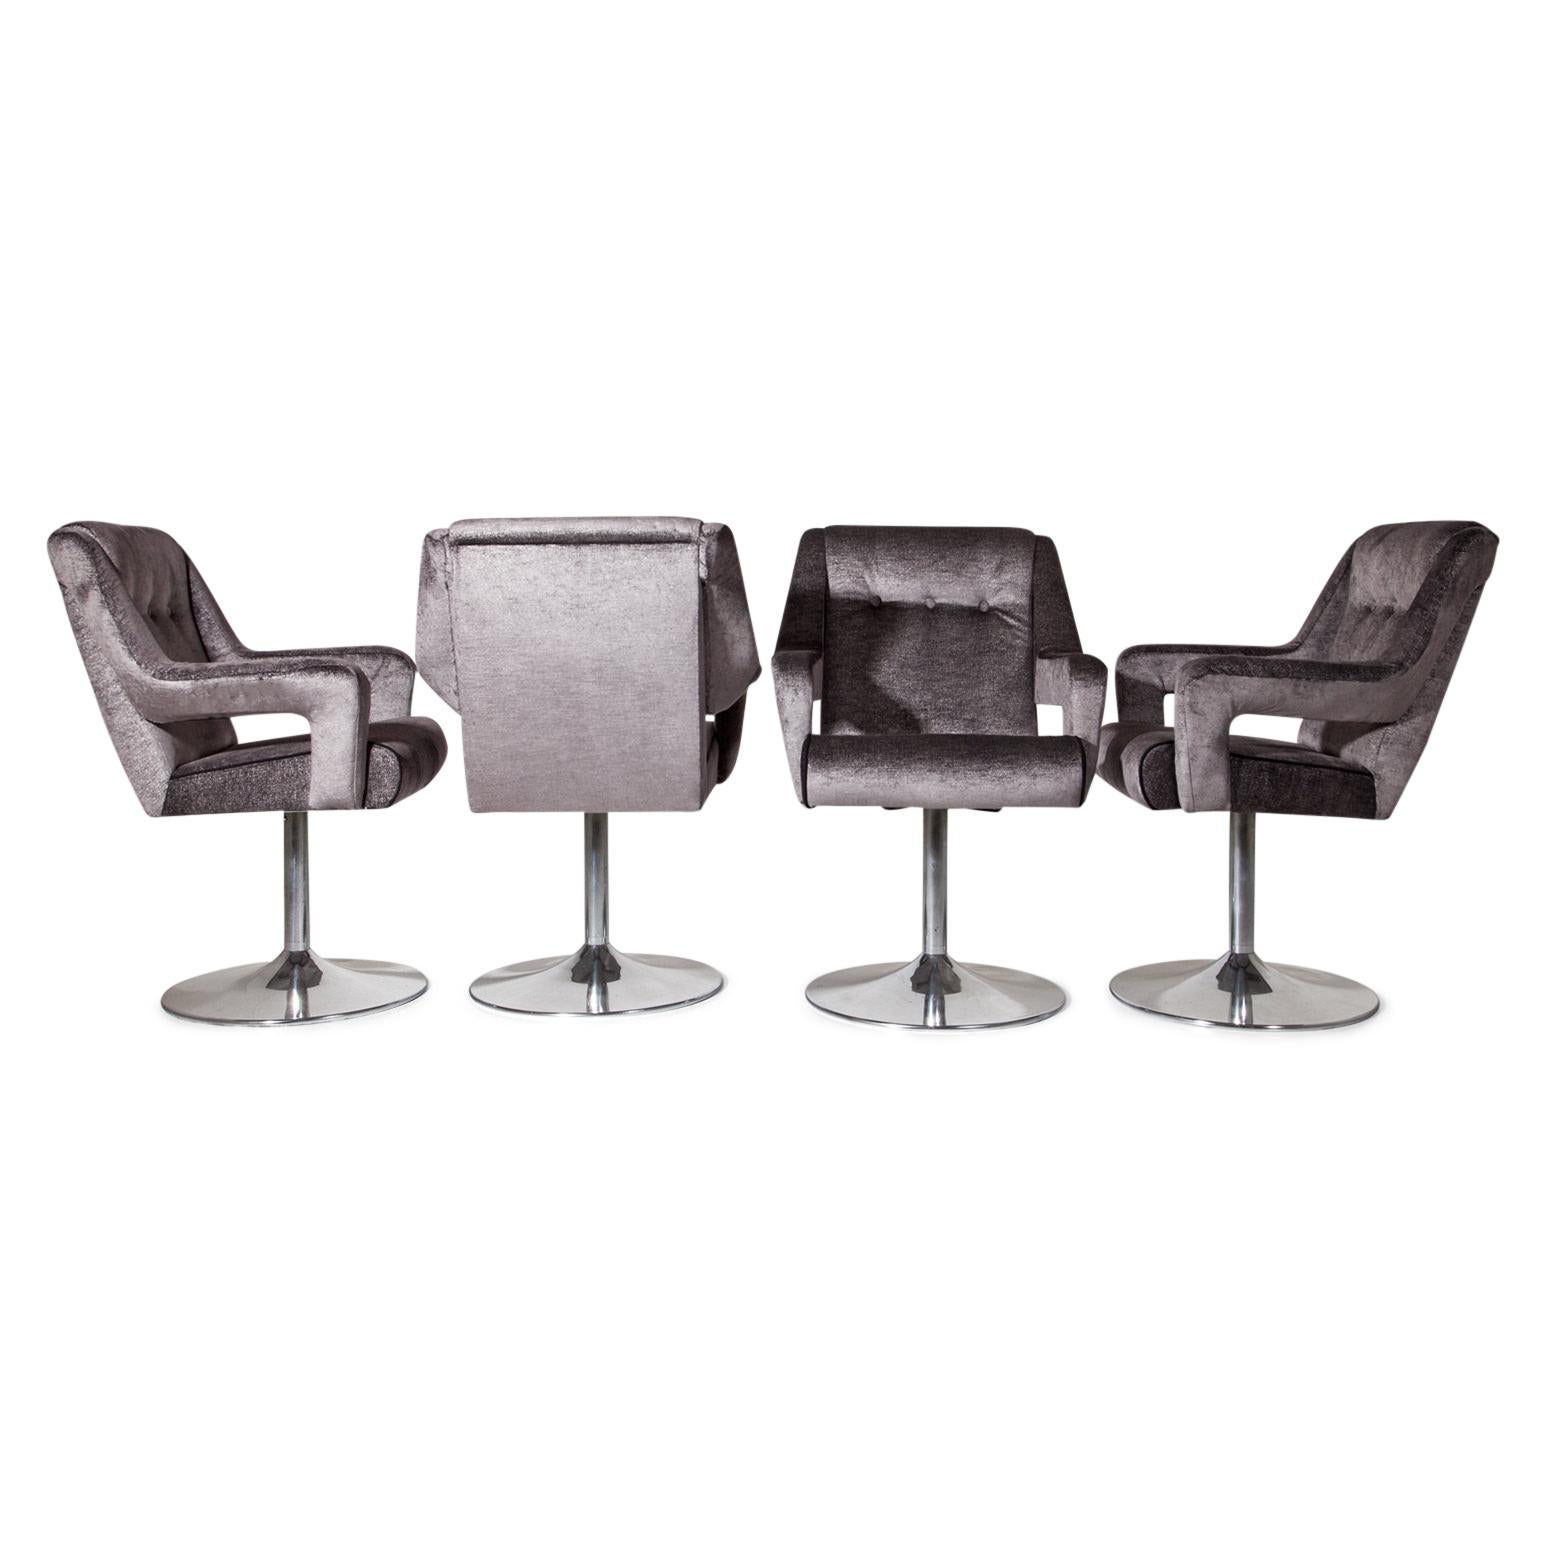 Set of six swivel chairs on round chromed legs and upholstered seats with armrests. The chairs were reupholstered with a high quality fabric in grey with silver-colored threads.